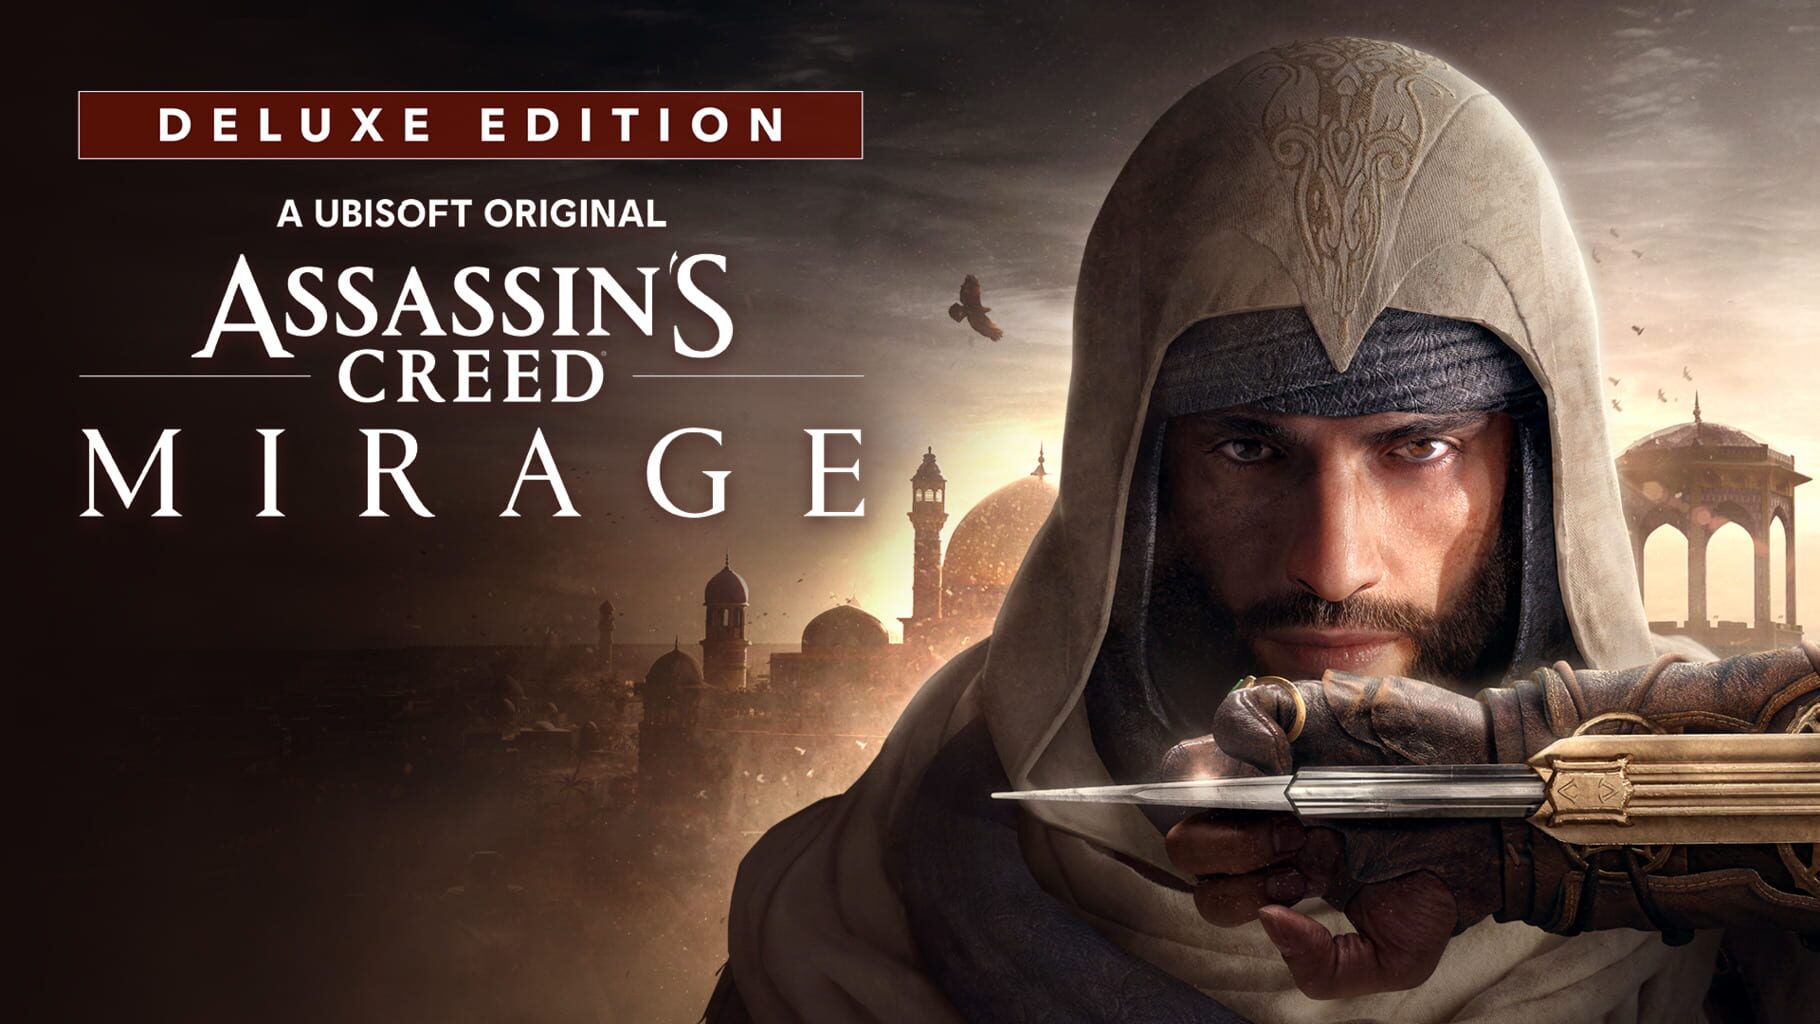 Arte - Assassin's Creed Mirage: Deluxe Edition